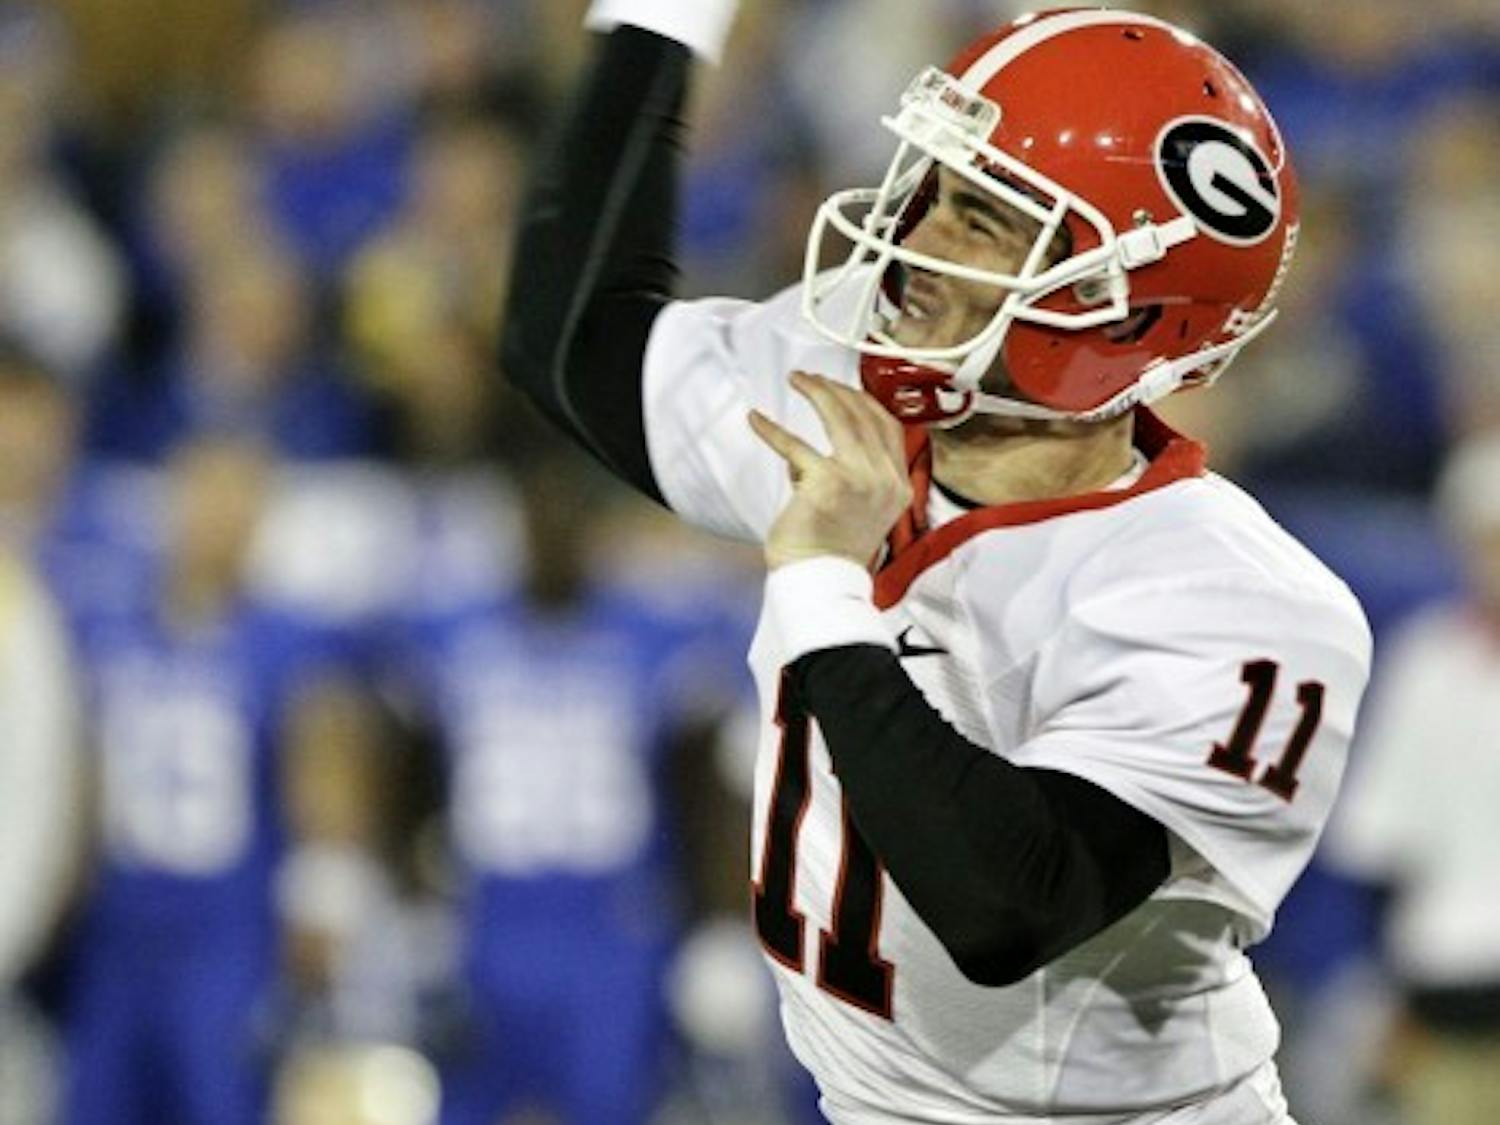 Georgia quarterback Aaron Murray (11) attempts a pass during the first half against Kentucky on Oct. 20, 2012, in Lexington, Ky.